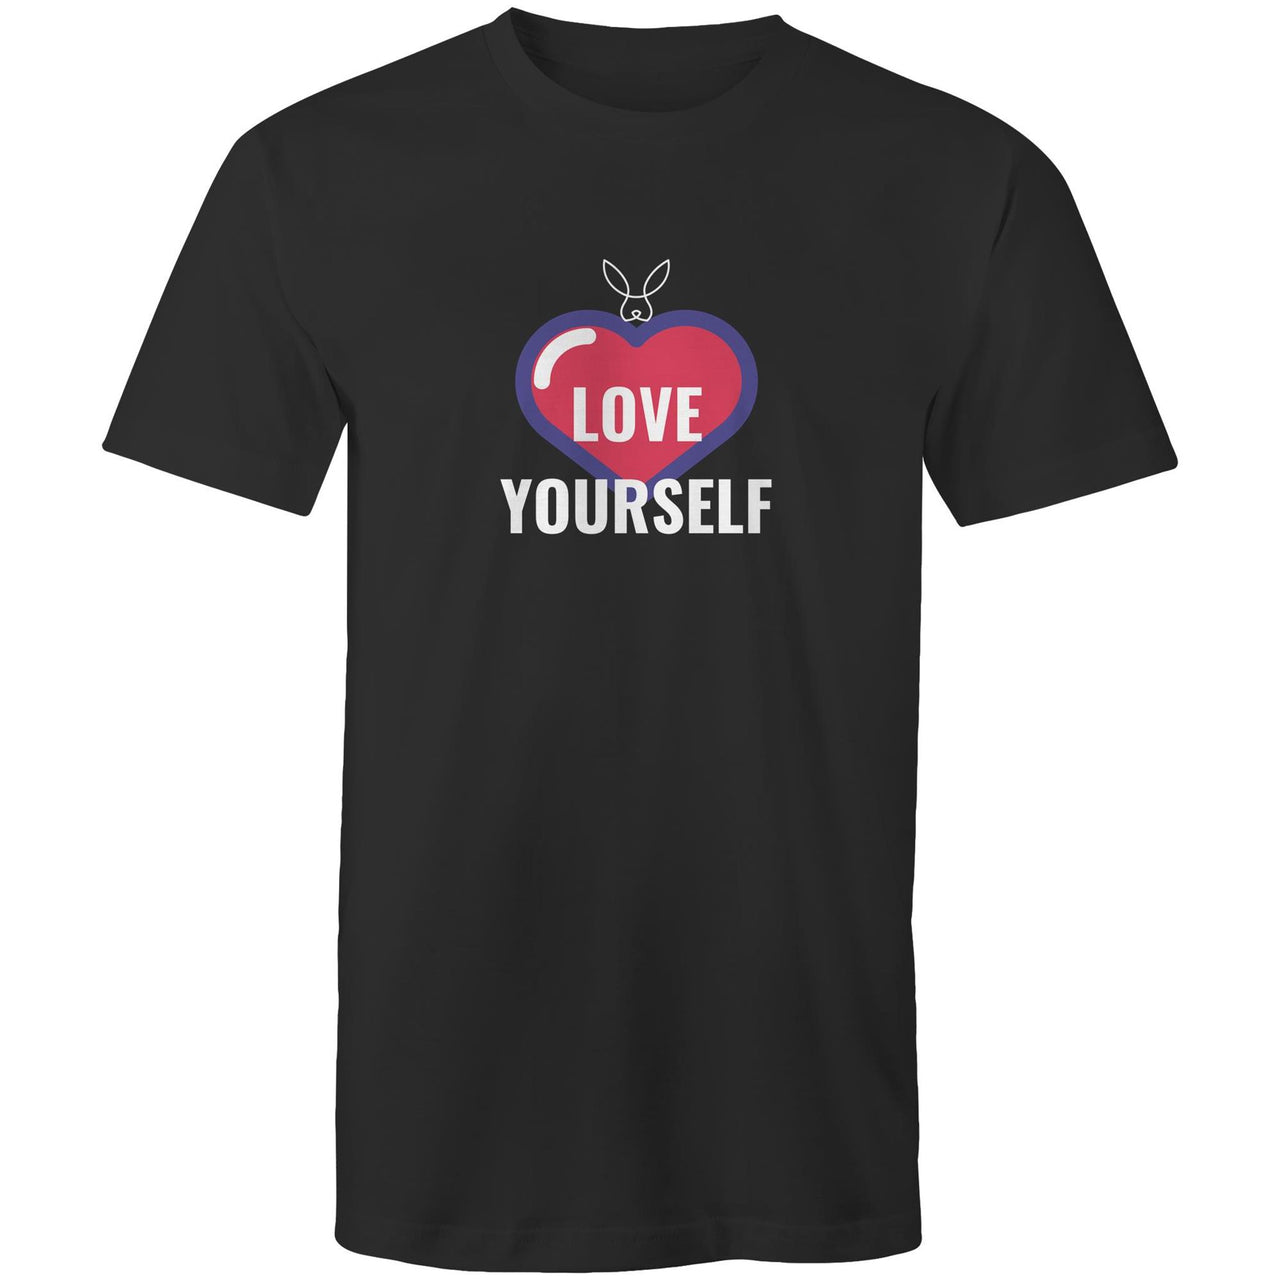 Love Yourself Crew T-Shirt by CBF Clothing Black